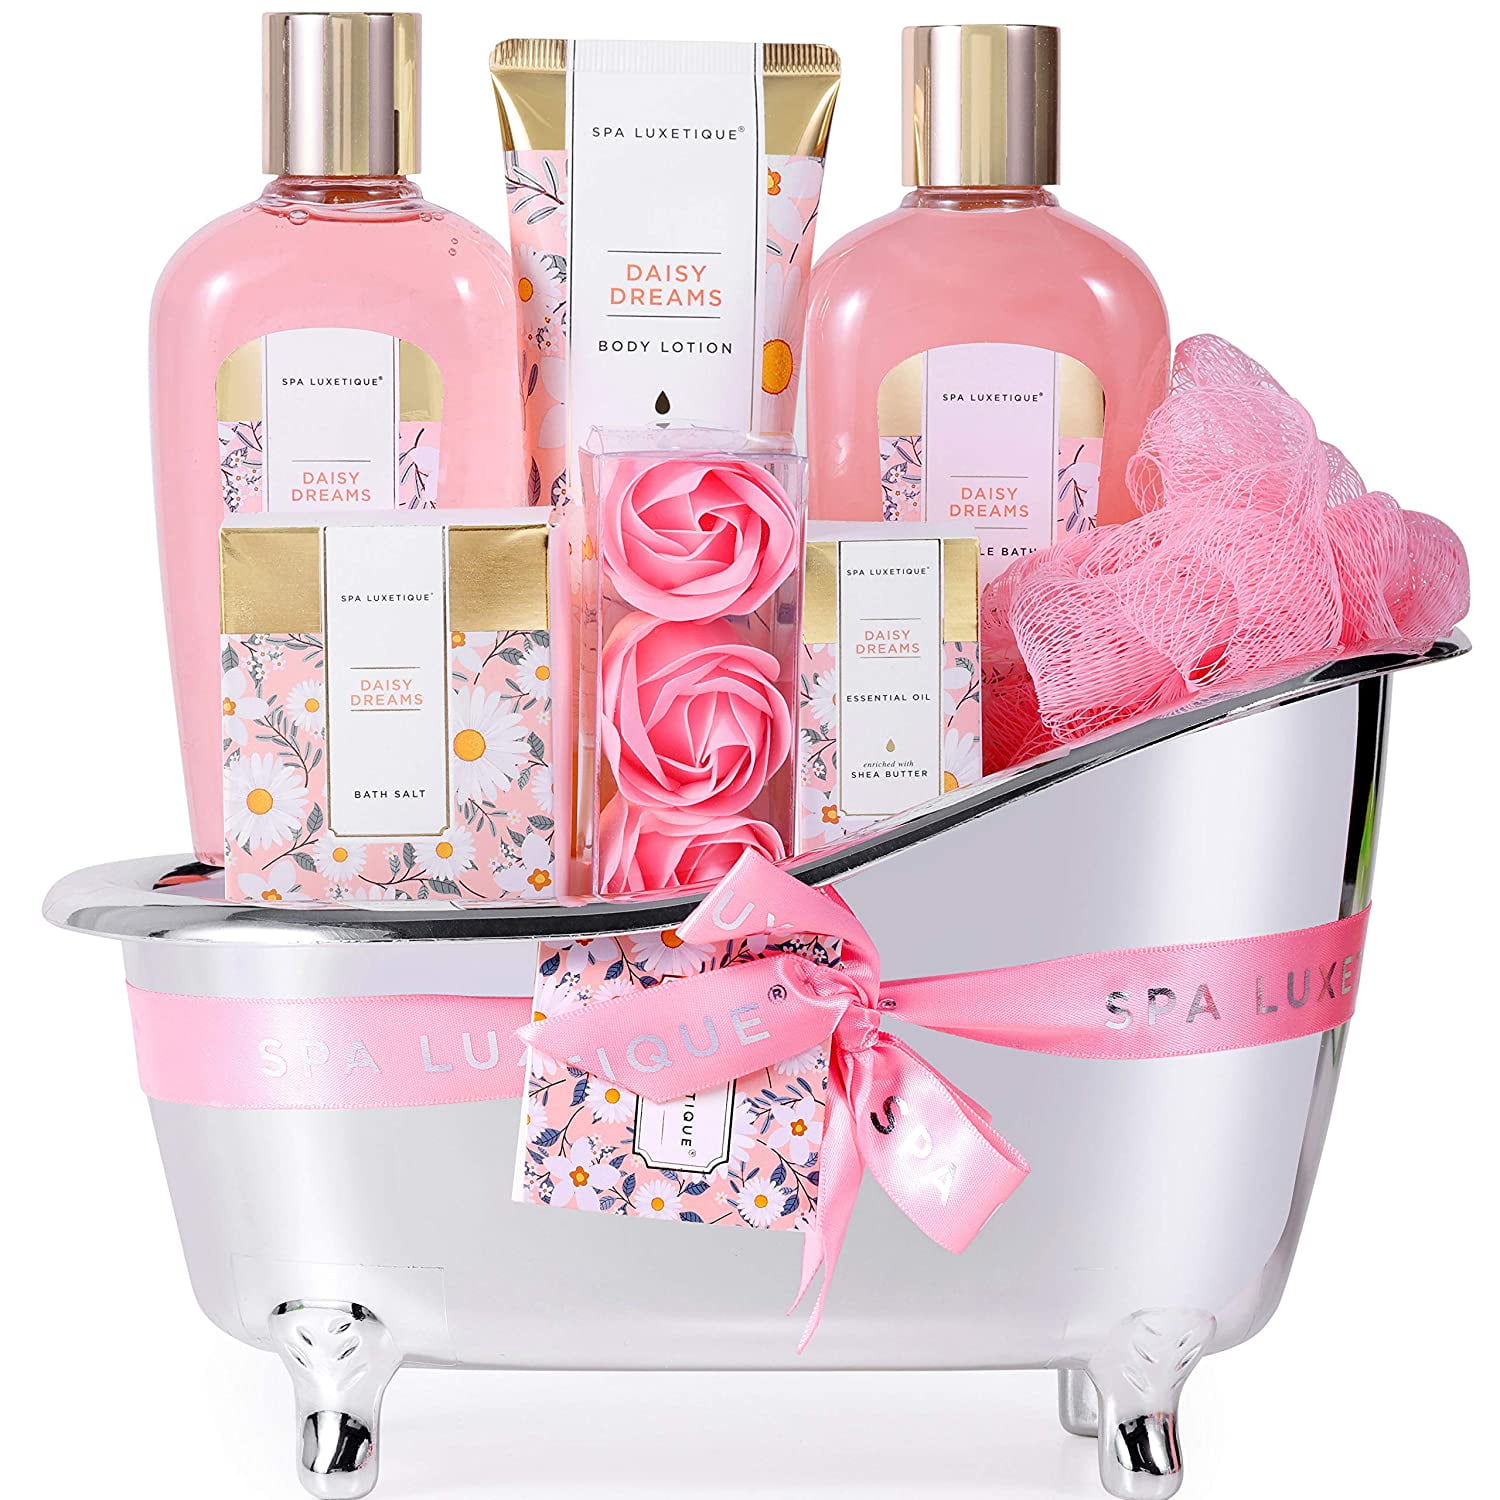 Reduced-price personal care gift sets